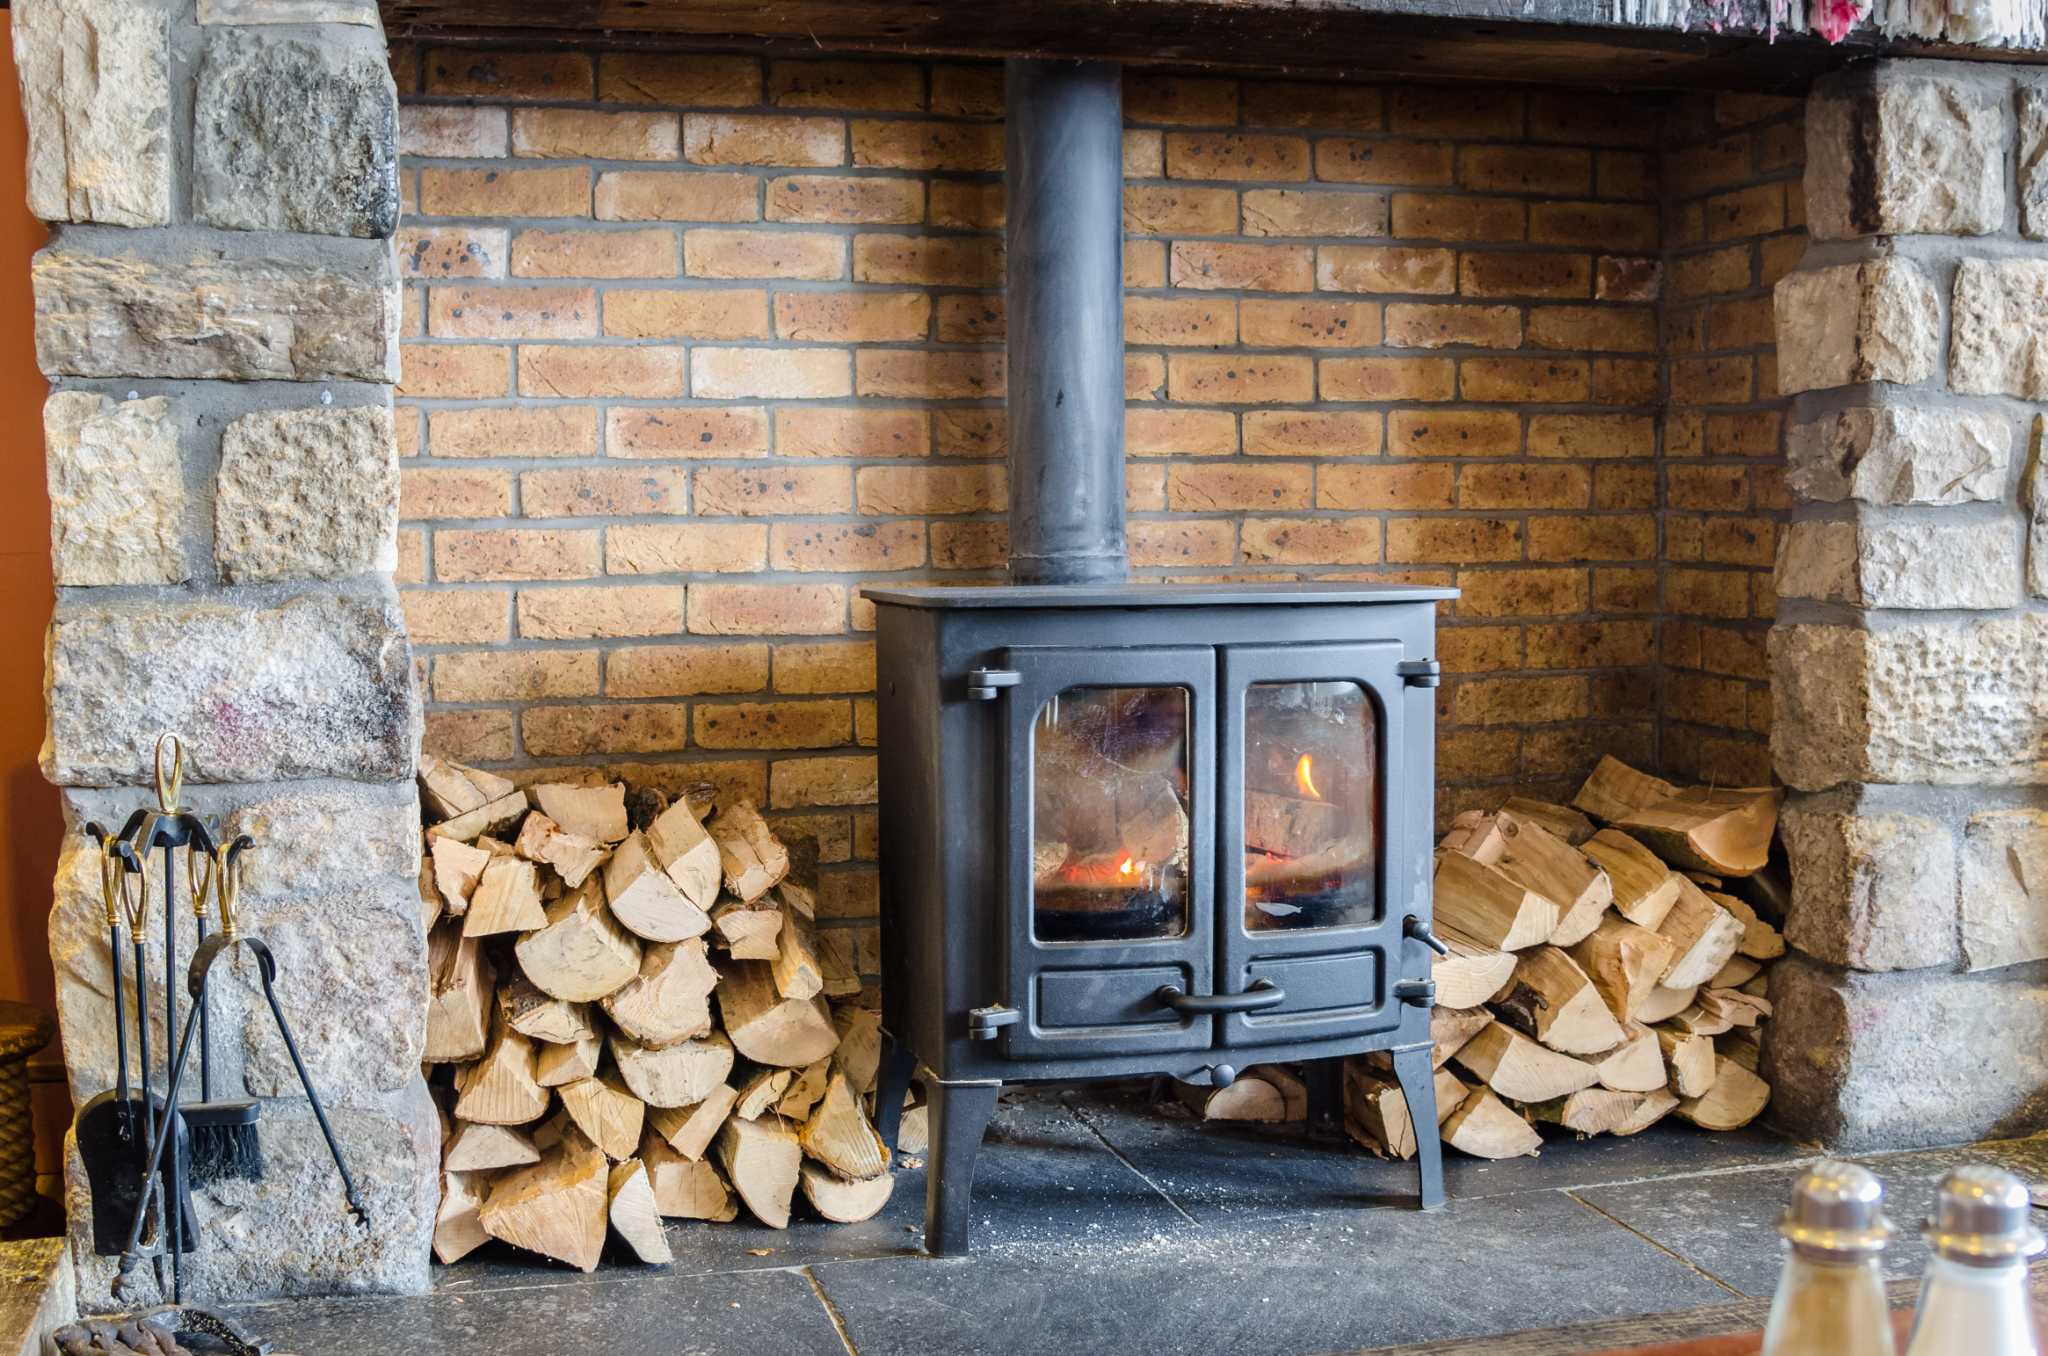 how to install wood stove pipe through wall - Google Search